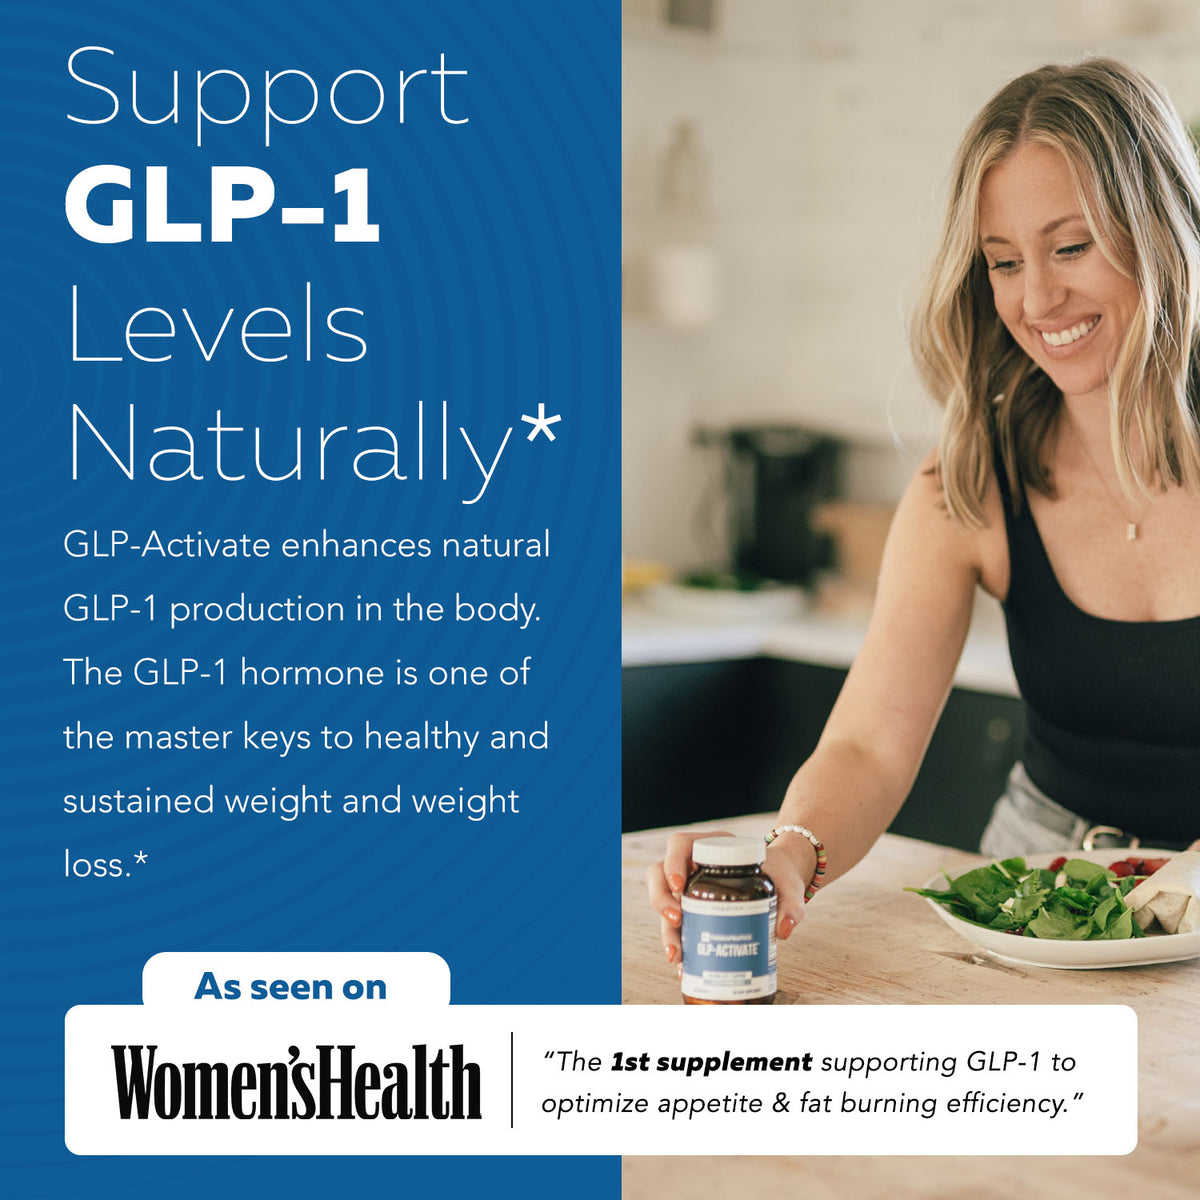 GLP-Activate: Natural GLP-1 Support*